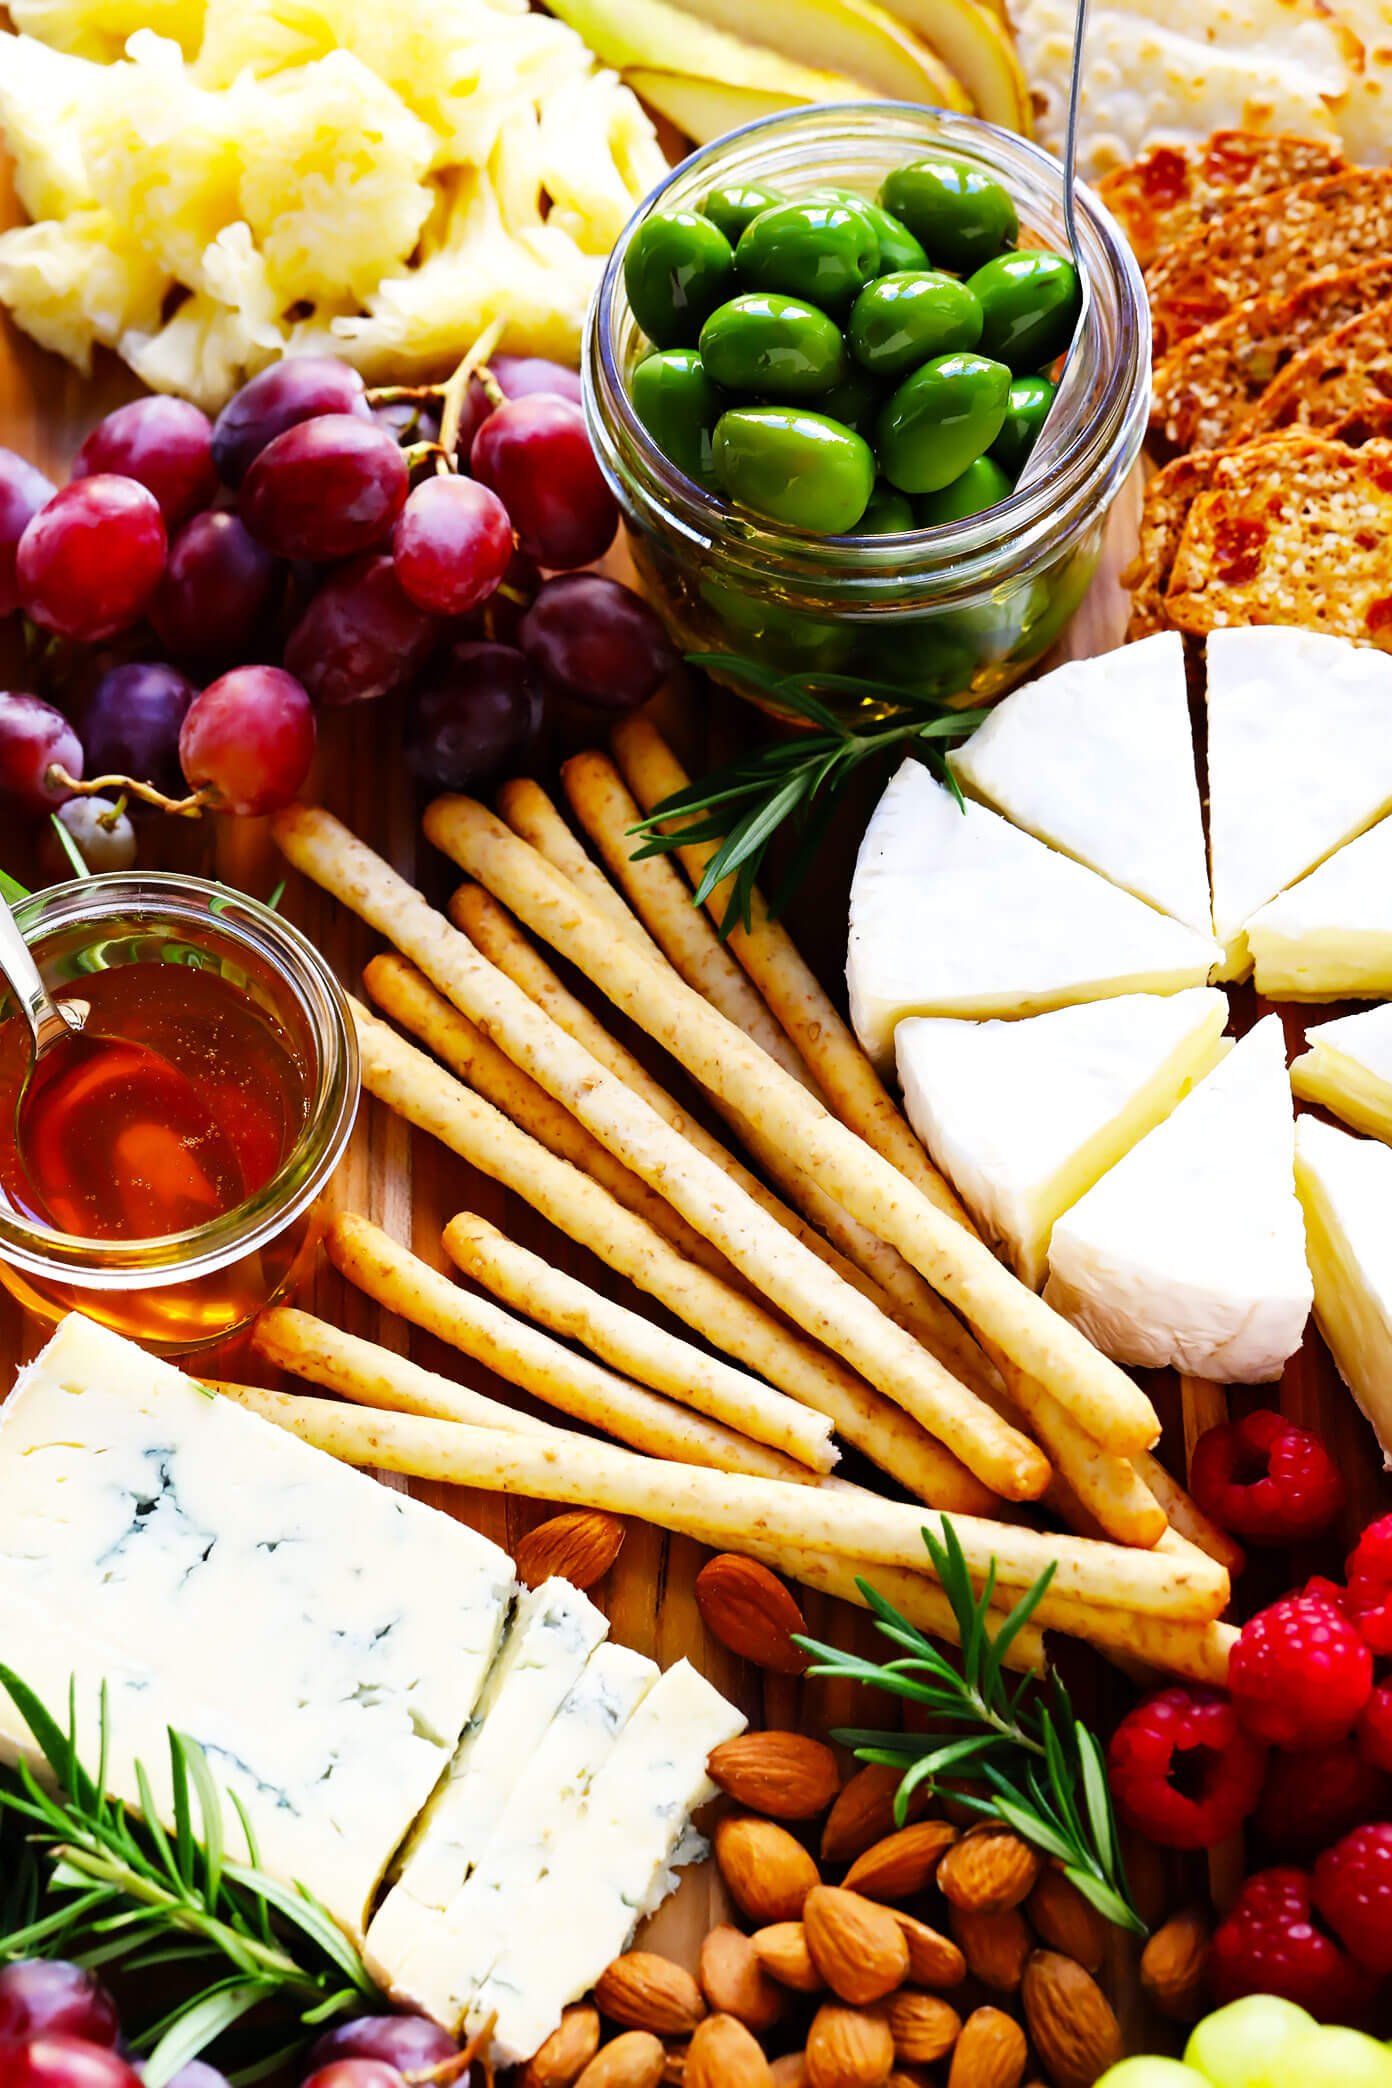 How To Make A Cheese Board